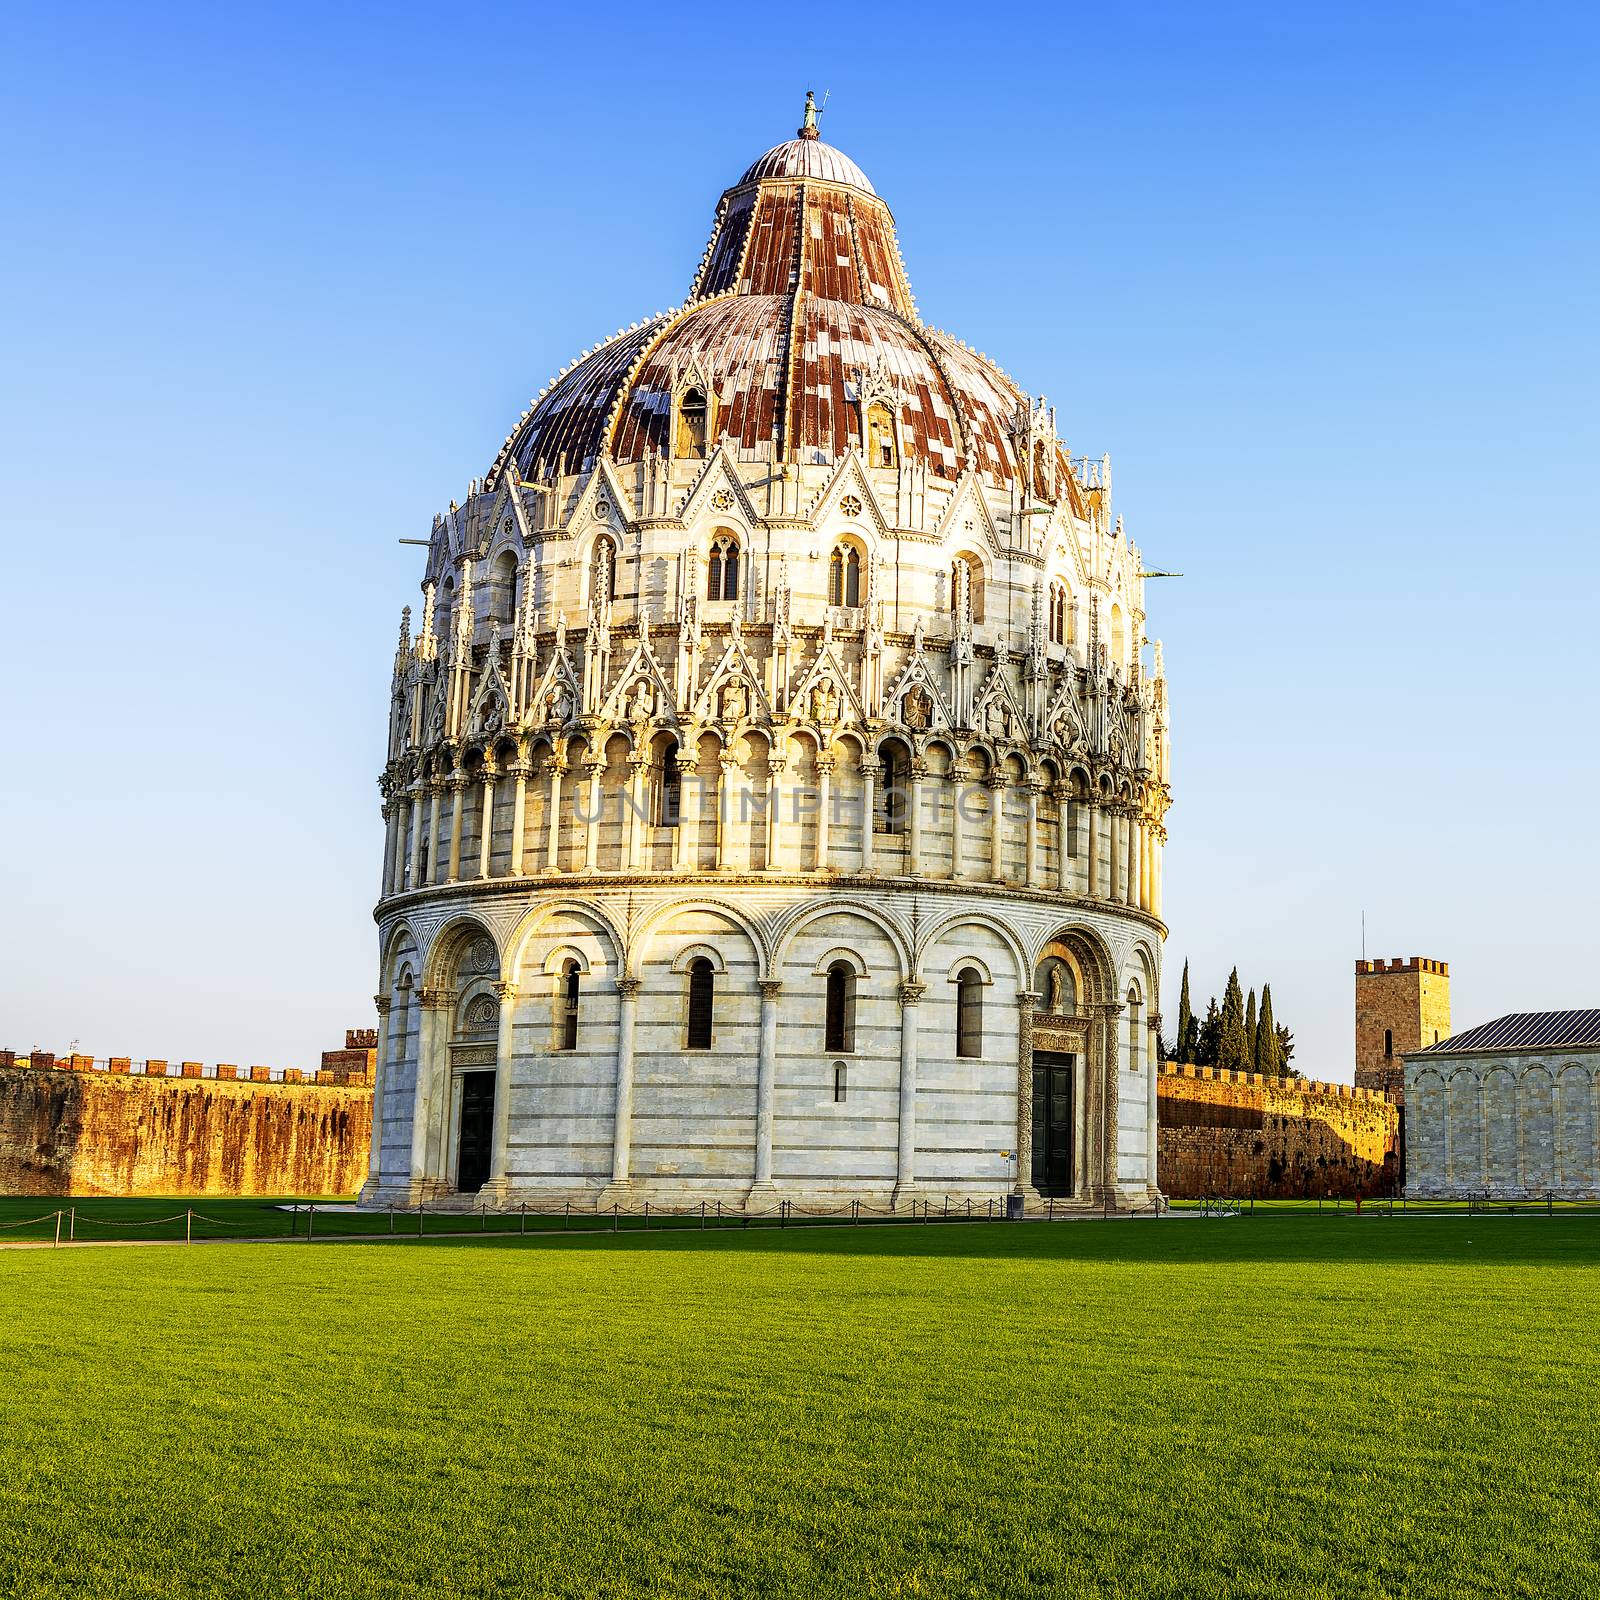 Famous Miraccoli place and his baptistry of Pisa, Tuscany, Italy